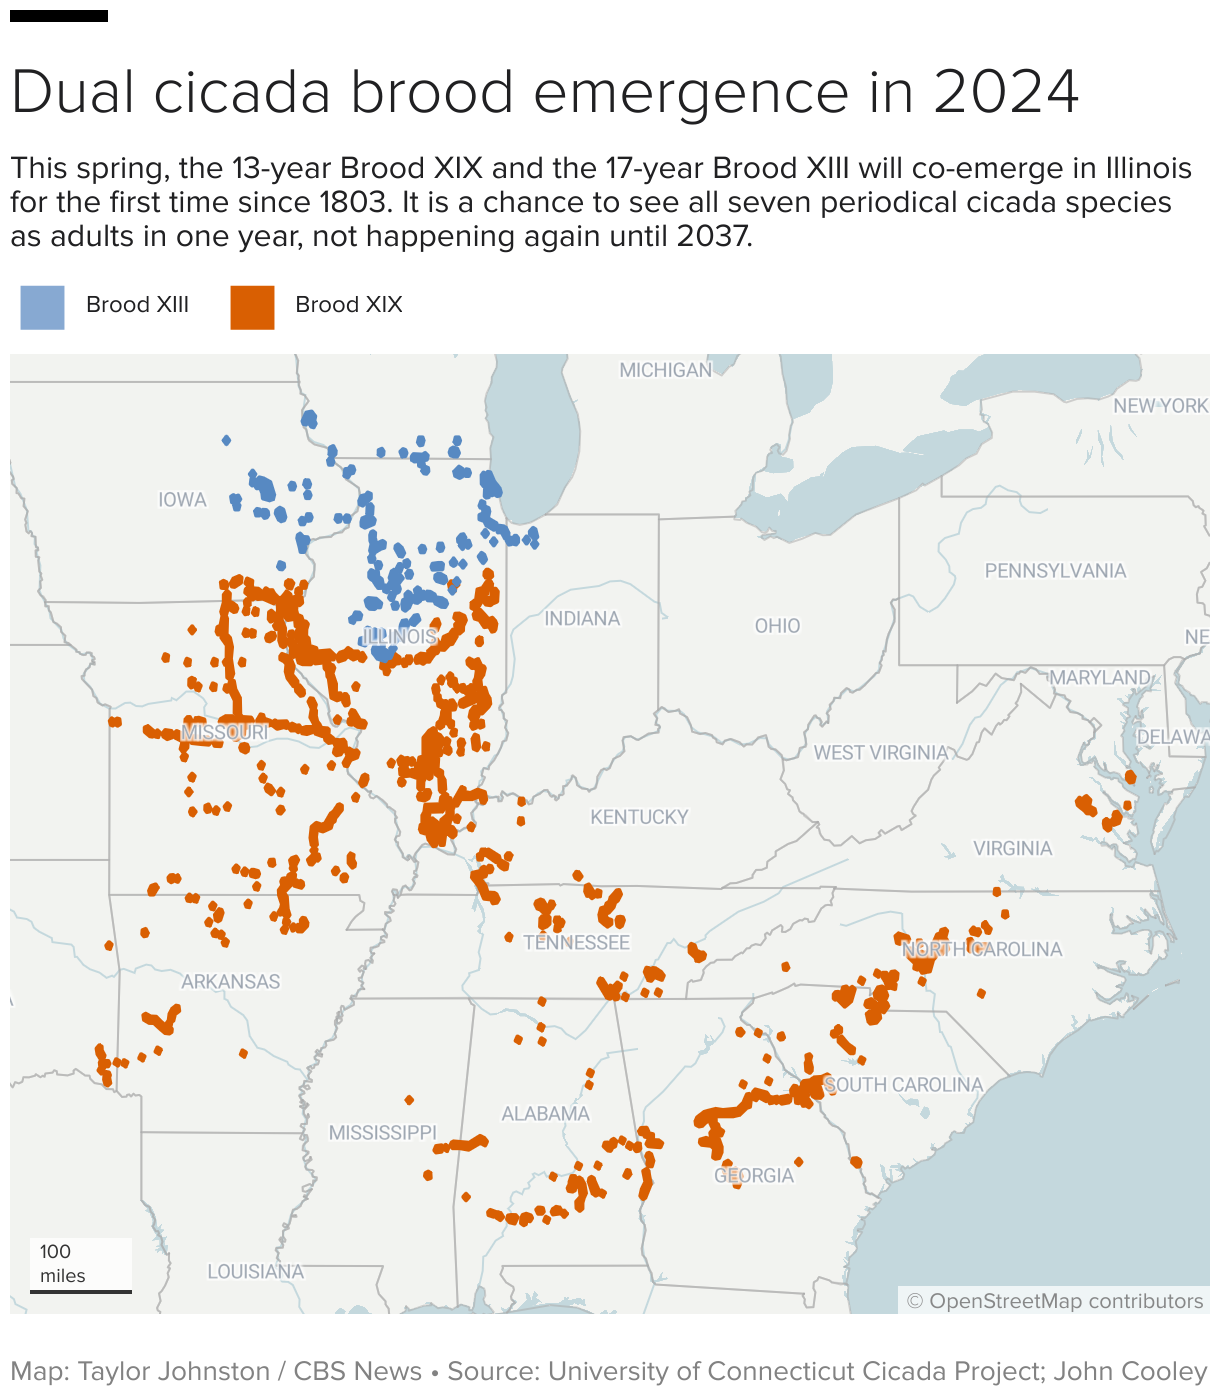 Map showing where the XIII and XIX cicada broods will emerge this spring in the U.S.